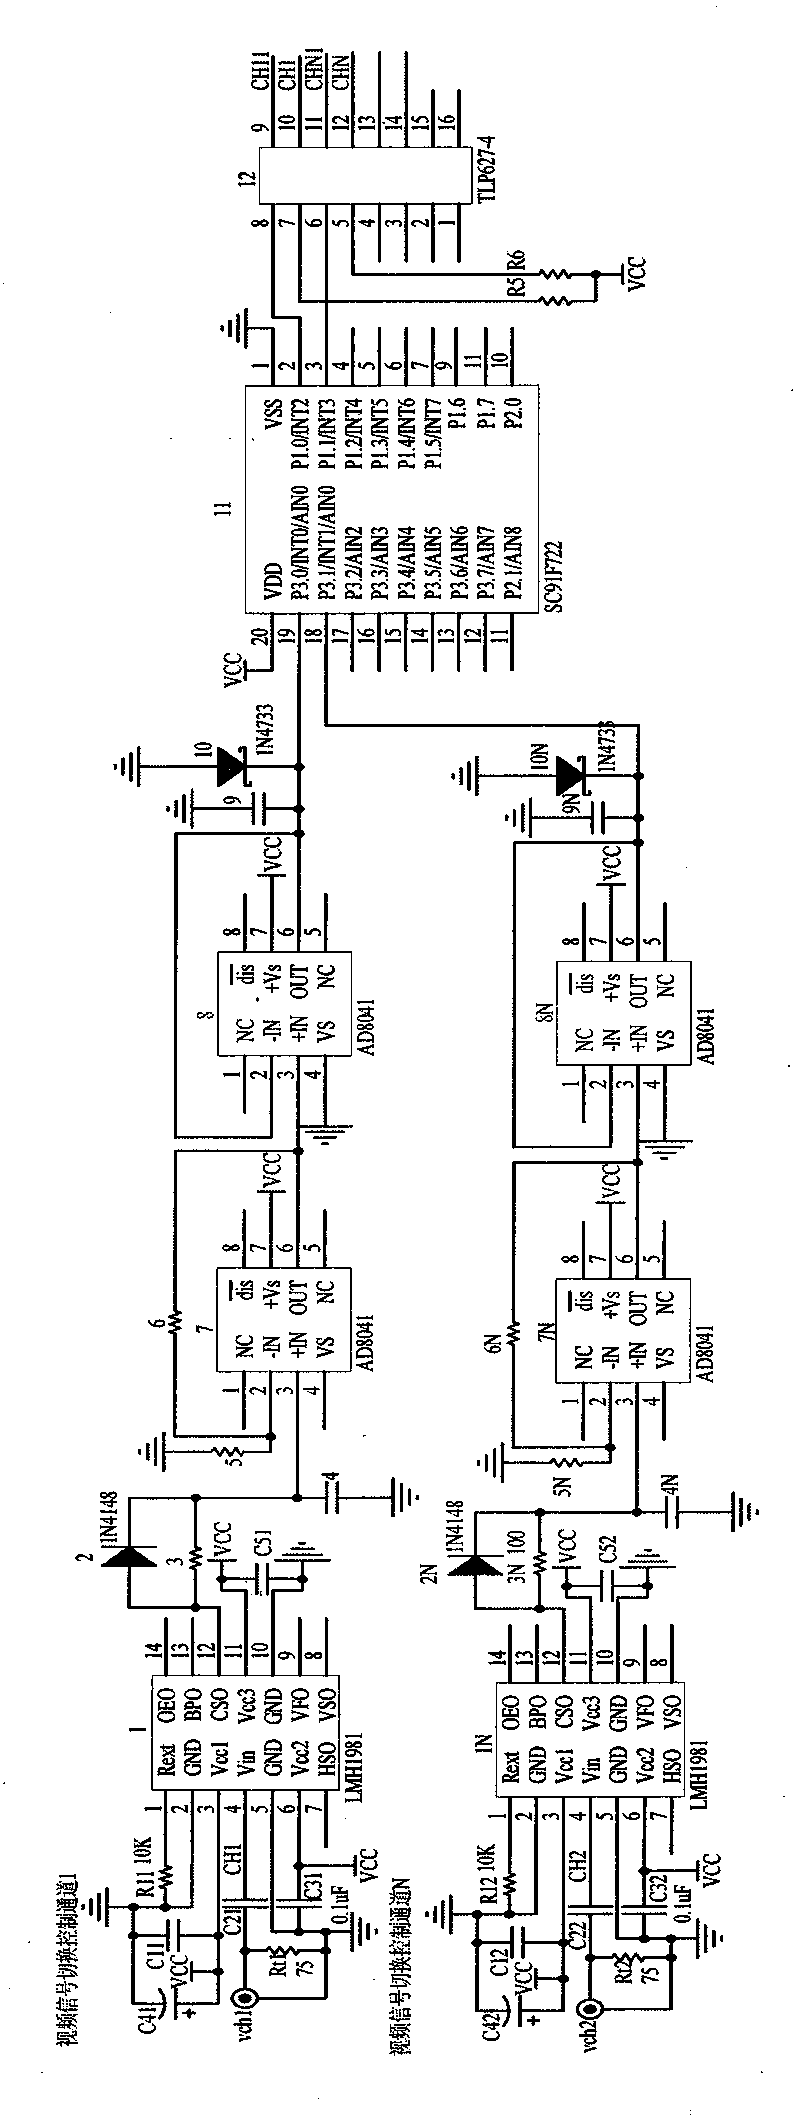 A control method for multi-channel video signal automatic switching control system